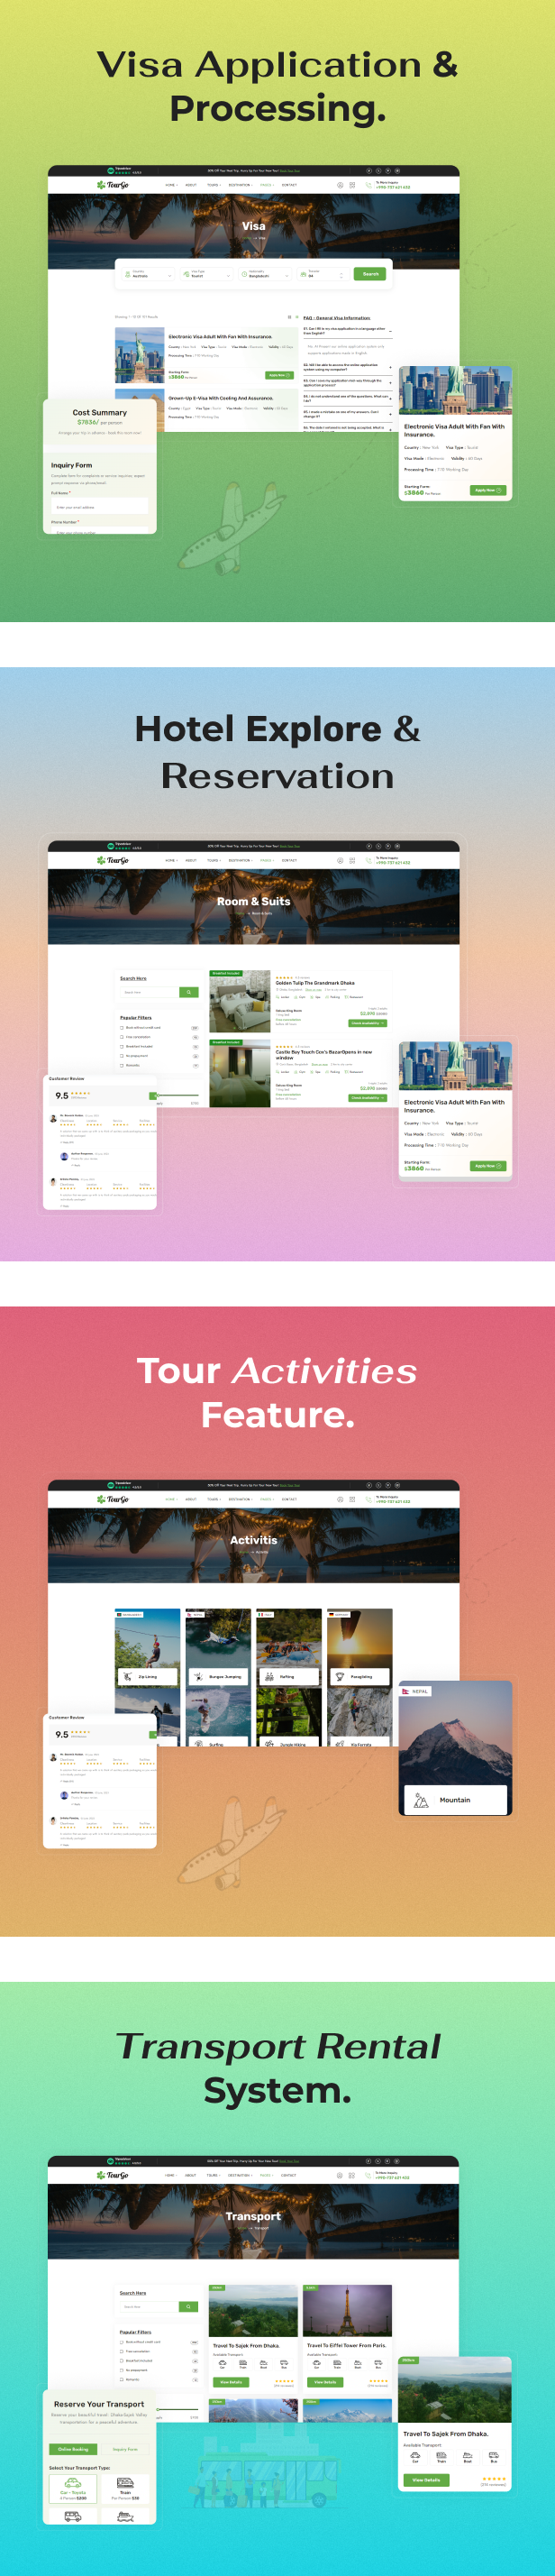 TripRex - Travel Agency and Tour Booking Template - 3